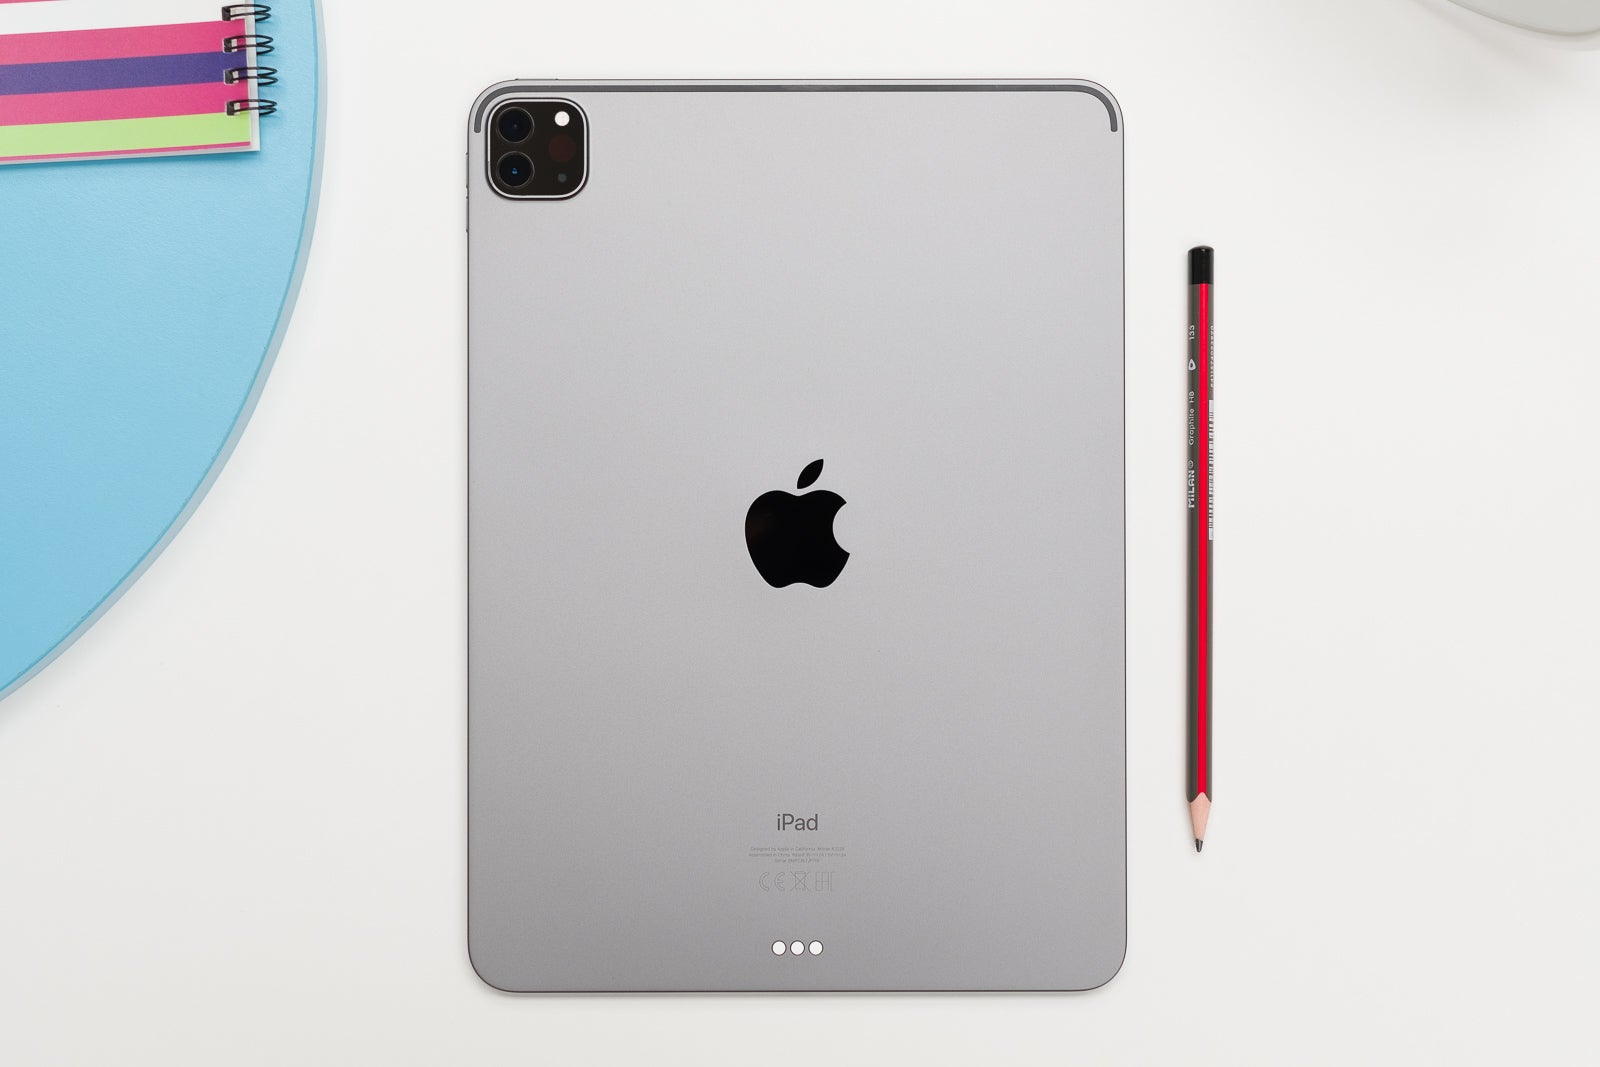 Apple has reportedly delayed the Mini-LED 5G iPad Pro until early 2021